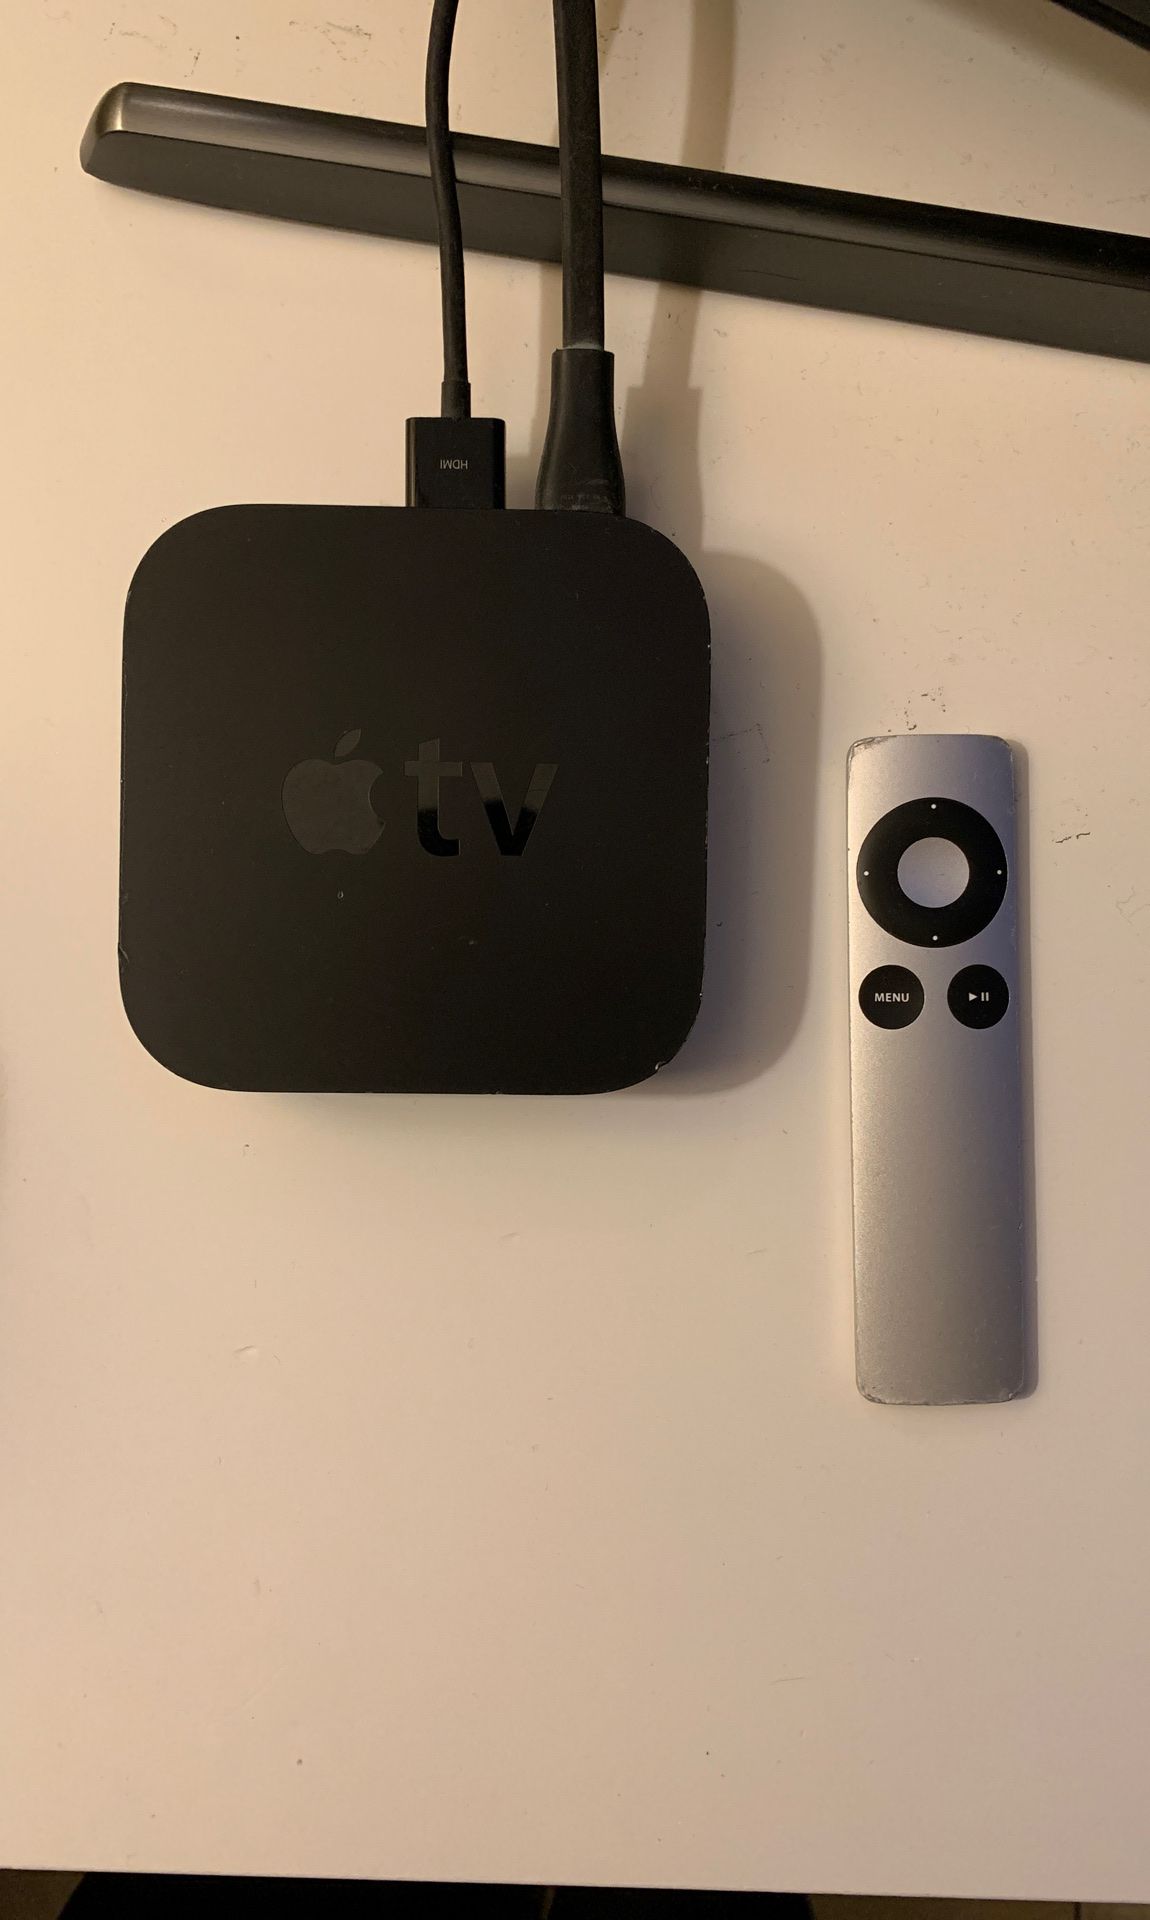 Apple TV 3rd Generation (remote and cambles included) if you want more photos, ask me :)